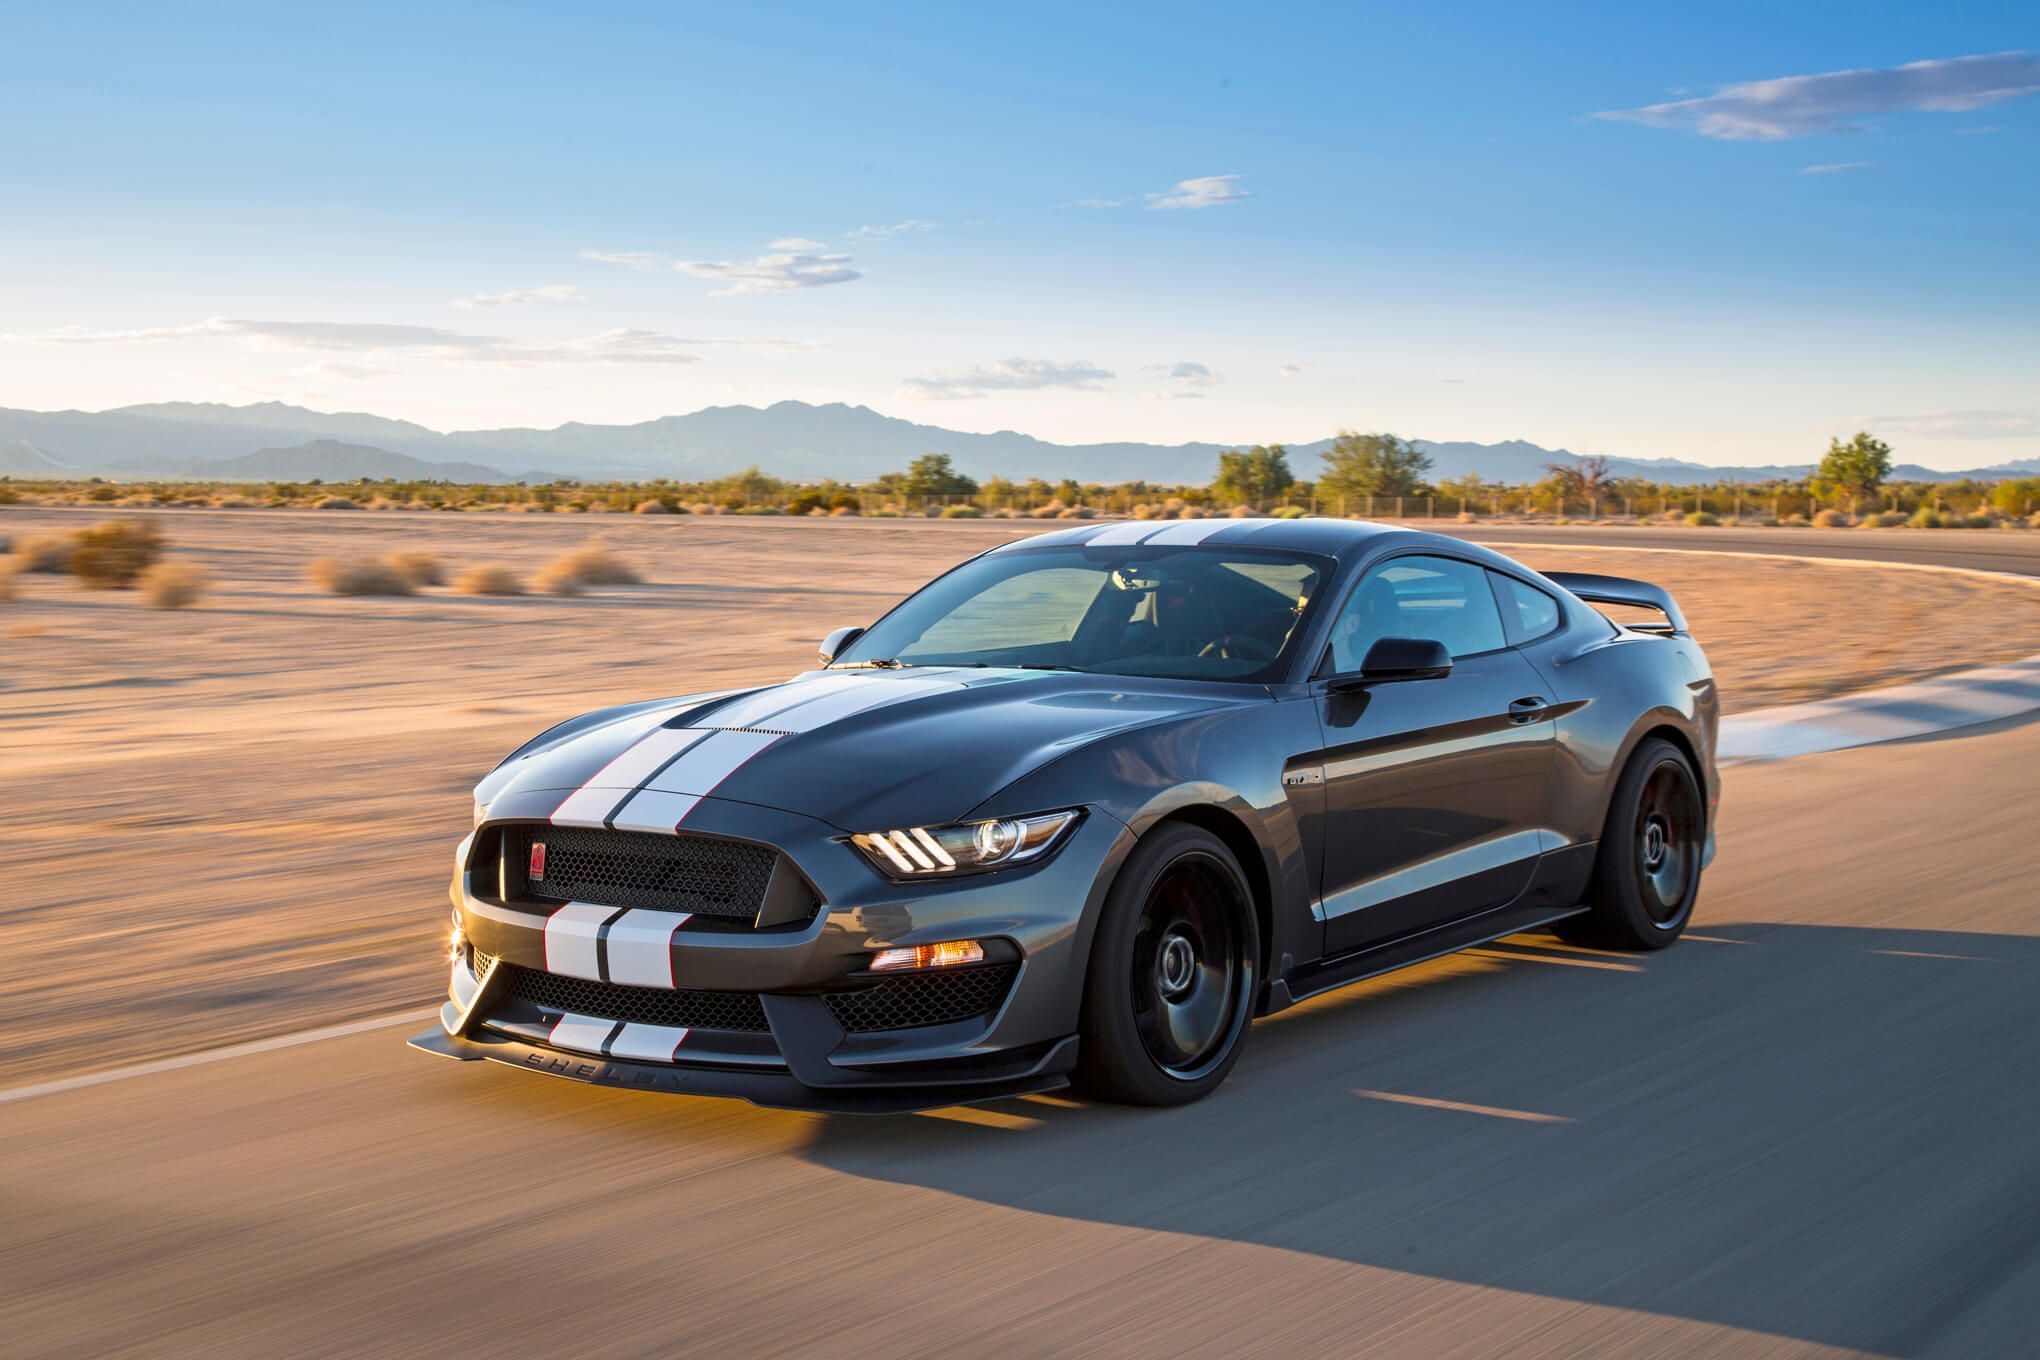 Ford Shelby GT350R. Mustang shelby, Mustang shelby cobra, Ford mustang